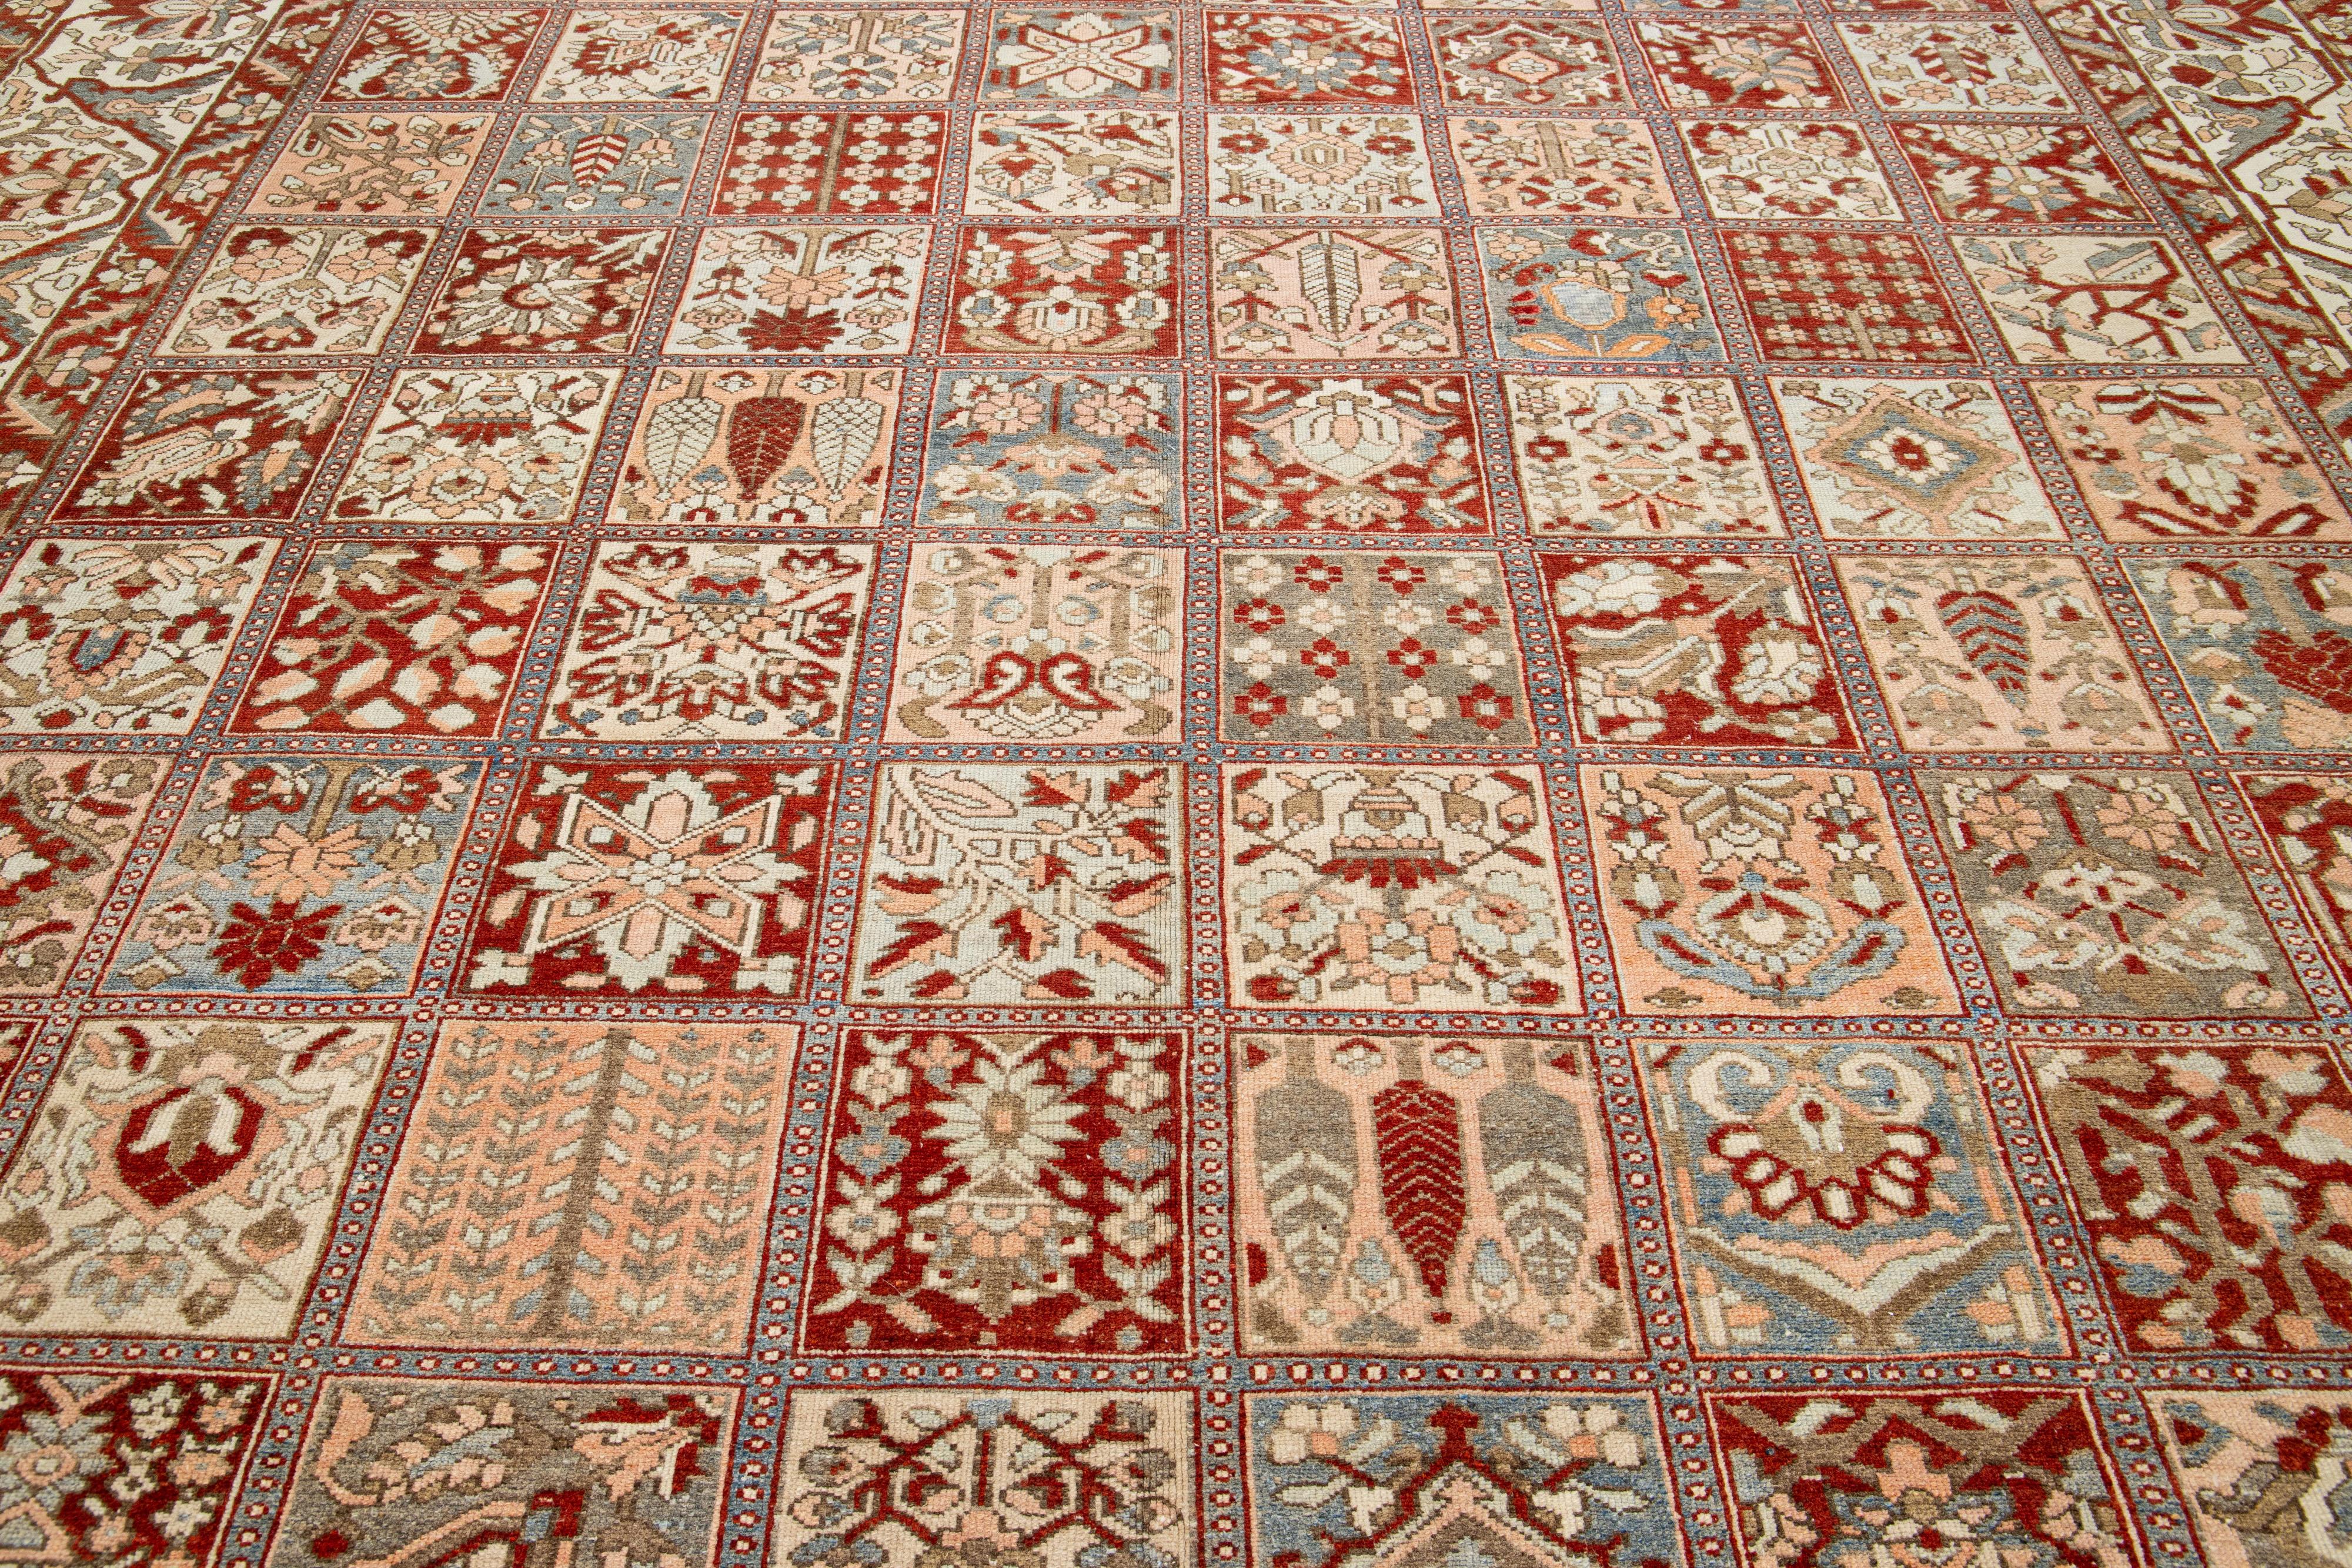 The Floral Persian Bakhtiari Rust Wool Rug Handcrafted in the 1920s im Zustand „Gut“ im Angebot in Norwalk, CT